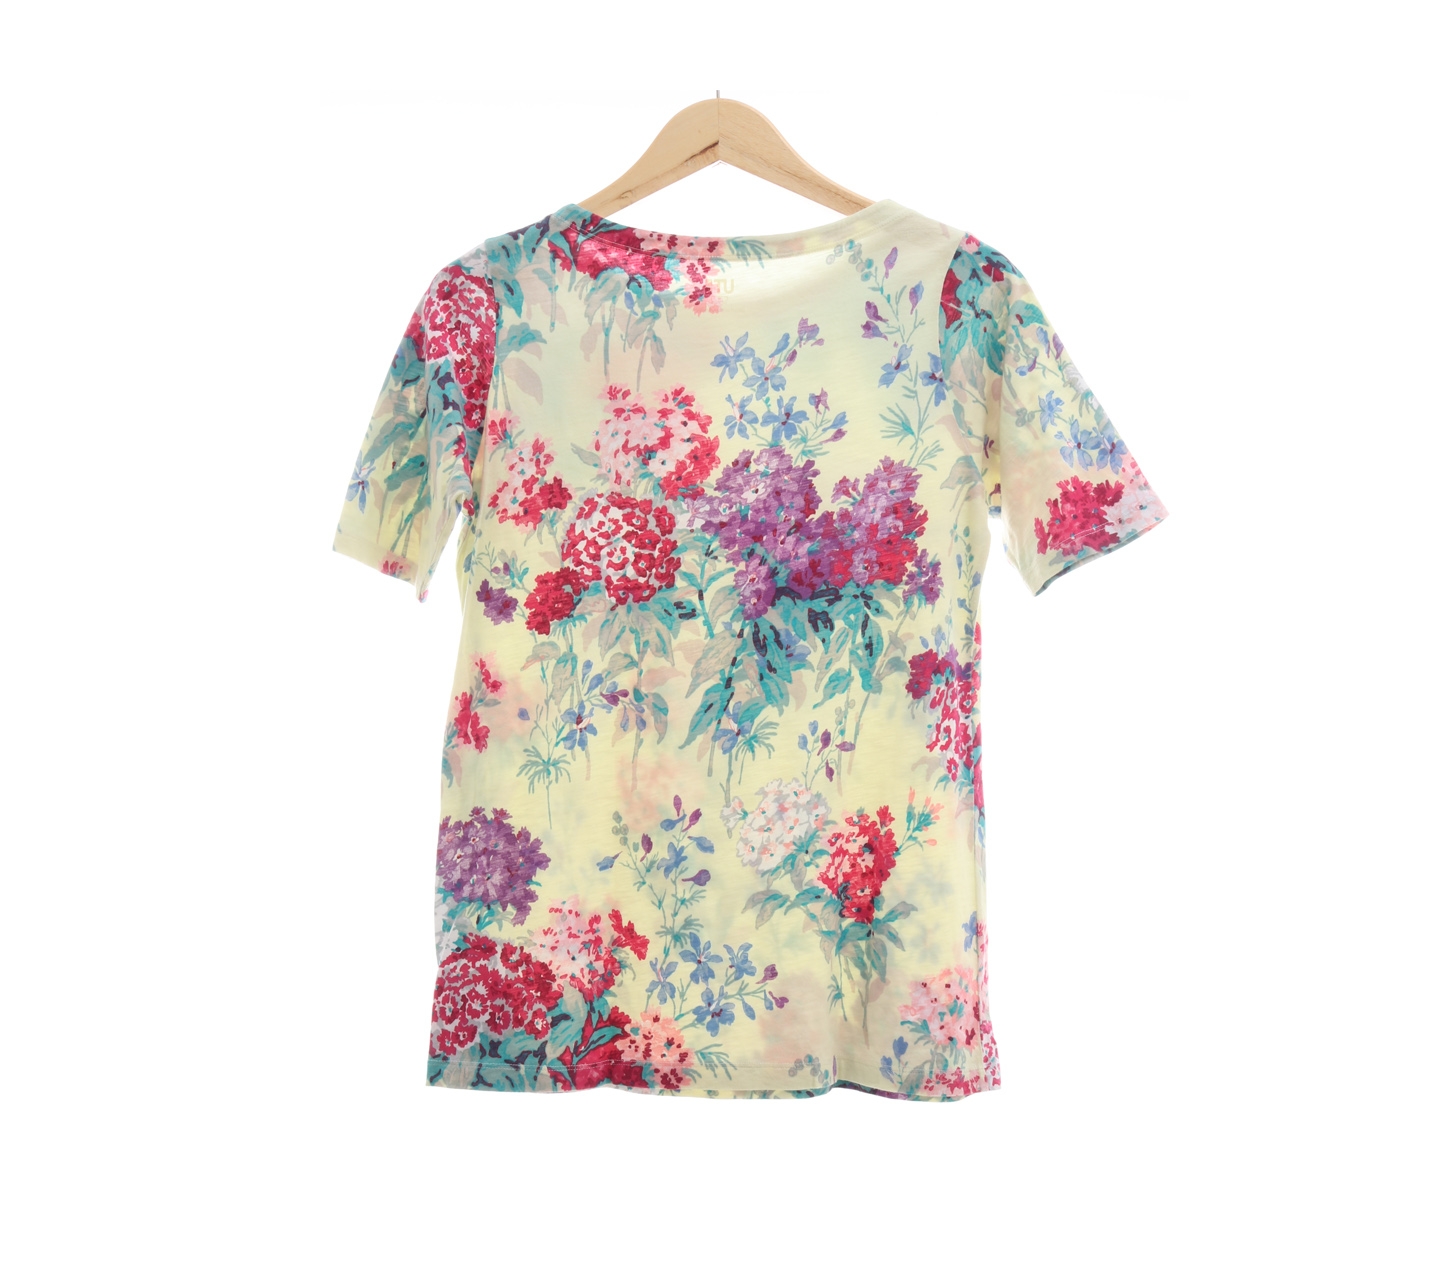 Uniqlo Yellow Floral T-Shirt